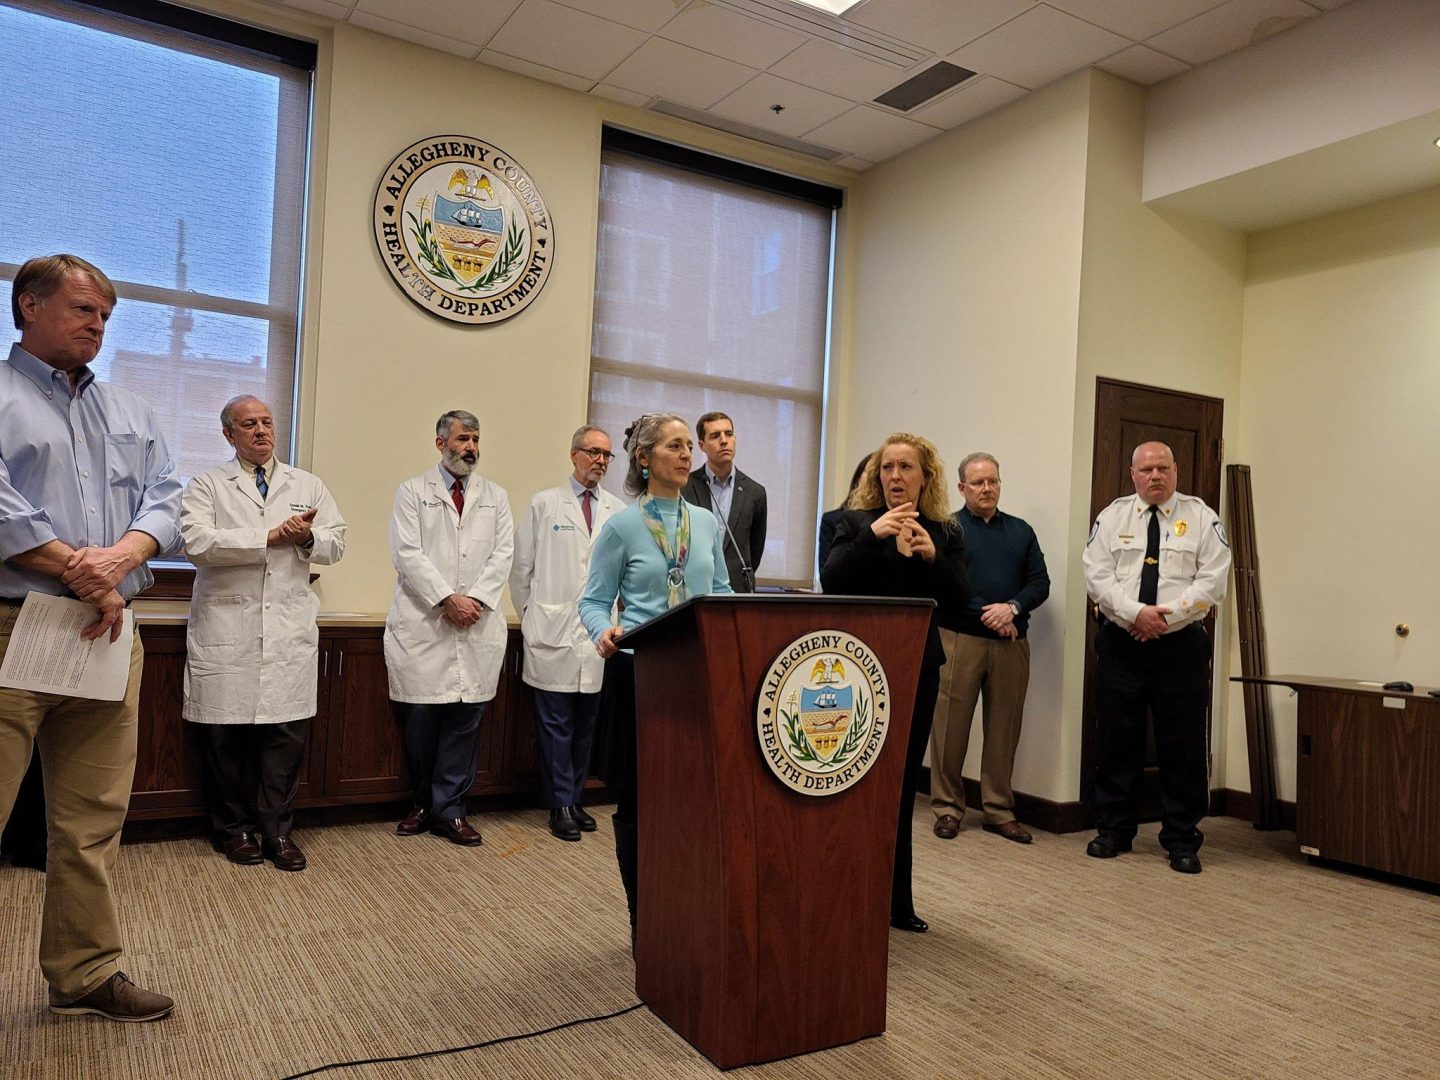 Dr. Debra Bogen of the Allegheny County Health Department, announcing two positive cases of COVID-19 on Saturday, March 14, 2020